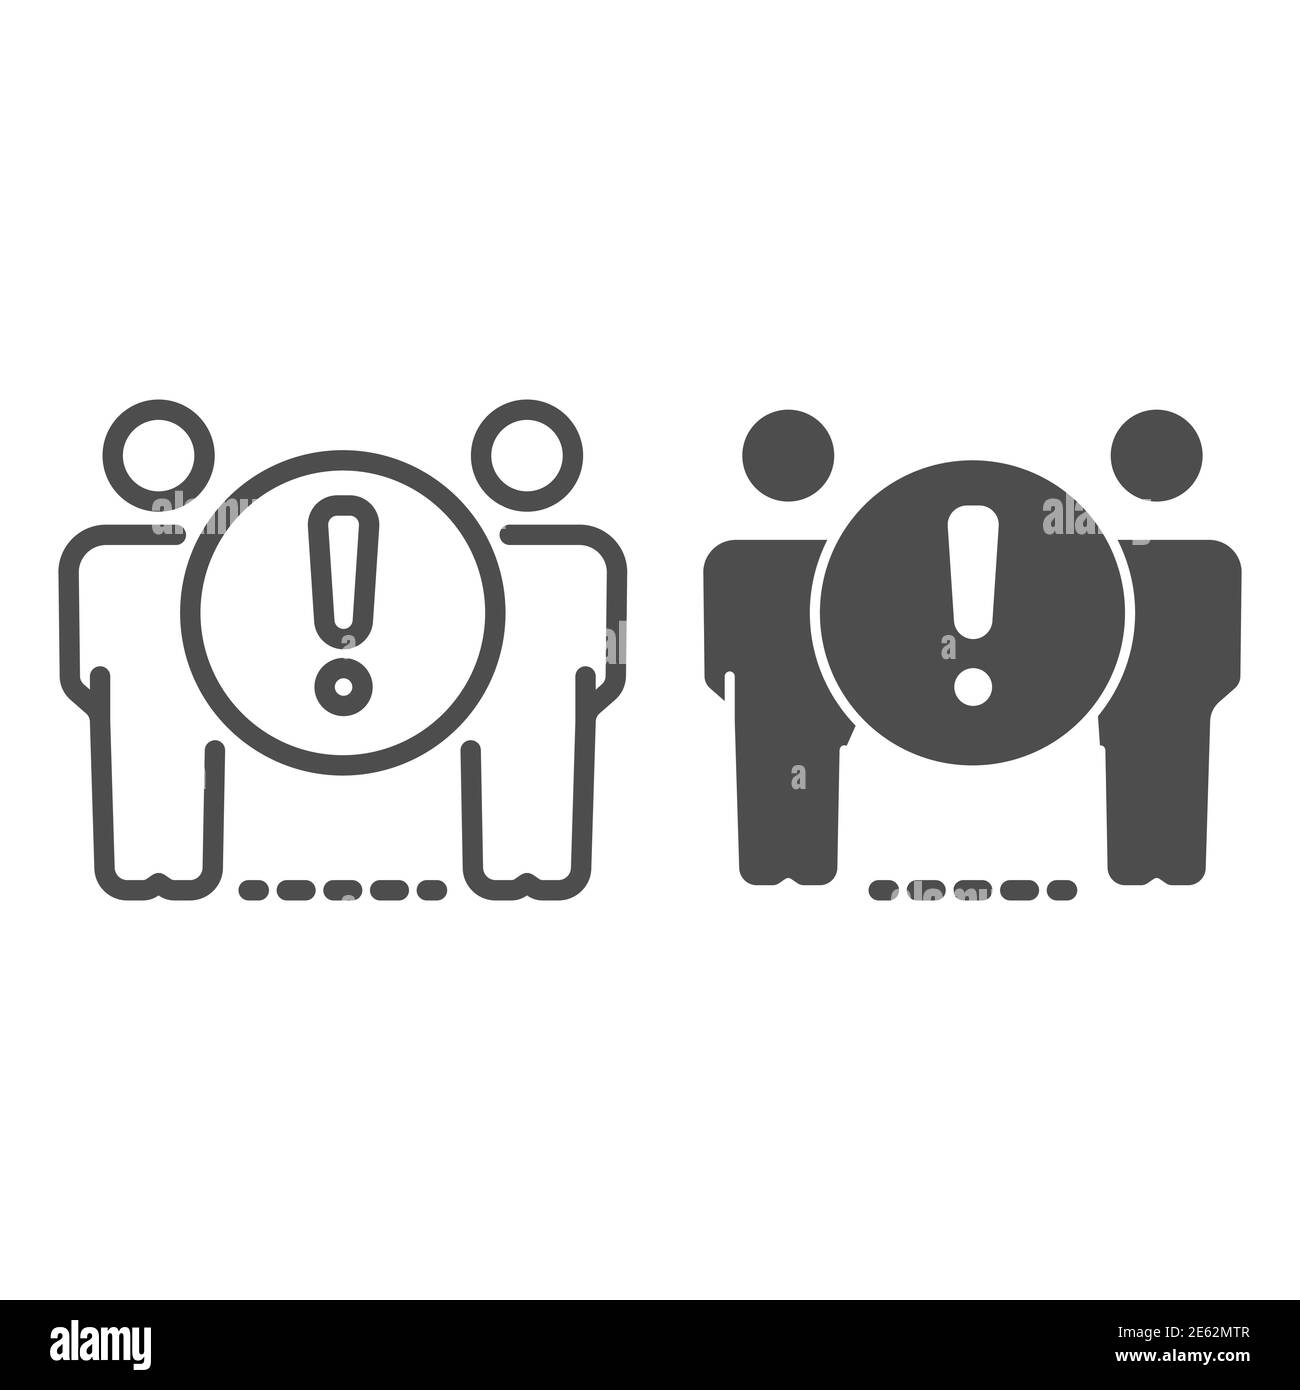 Two person standing at distance line and solid icon, social distancing, covid-19 concept, Keep distance with attention sign on white background, No Stock Vector